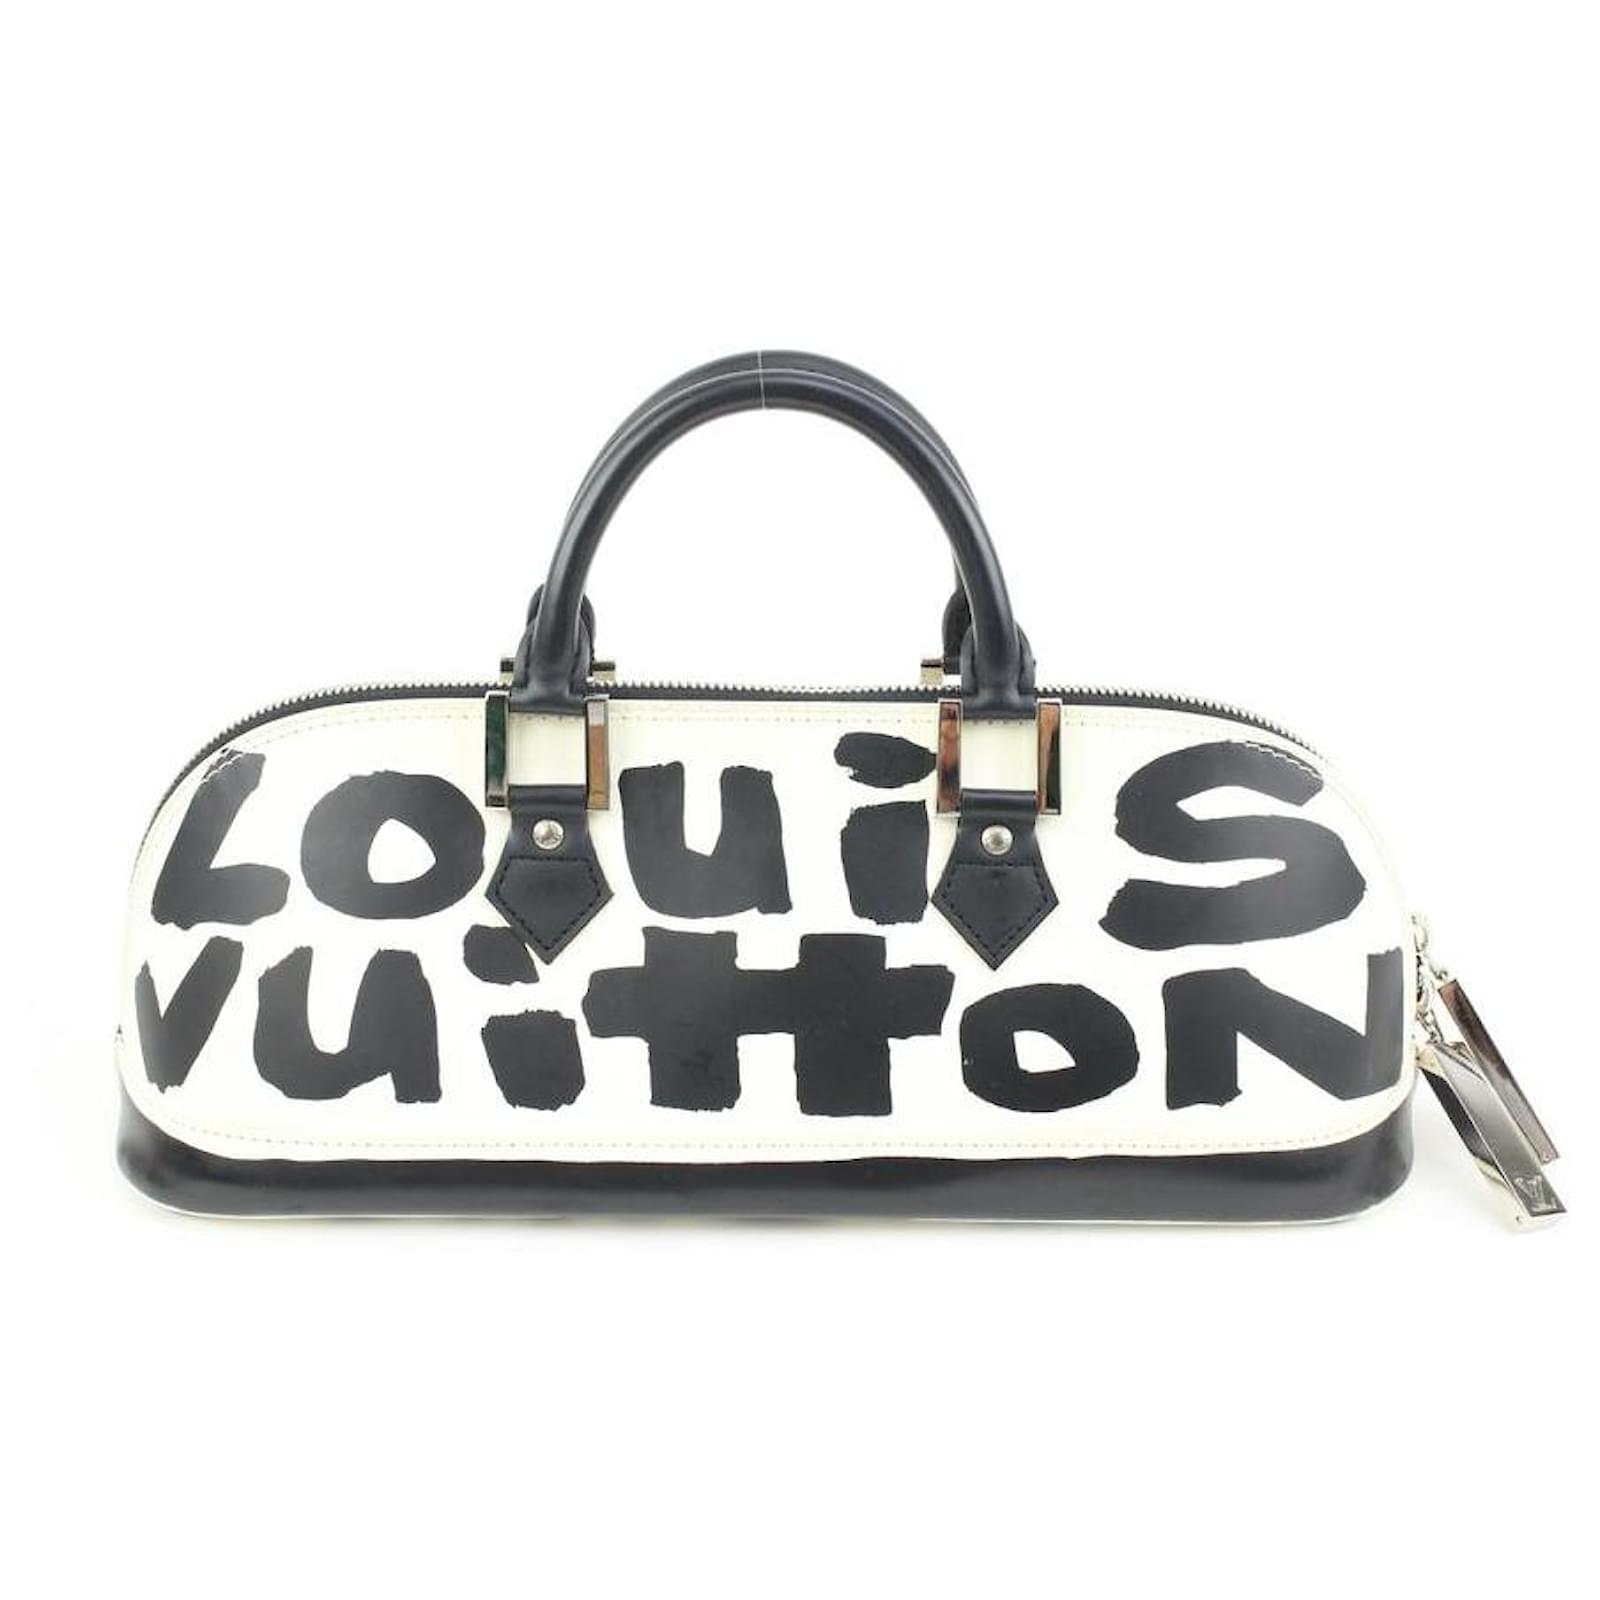 Stephen Sprouse for Louis Vuitton